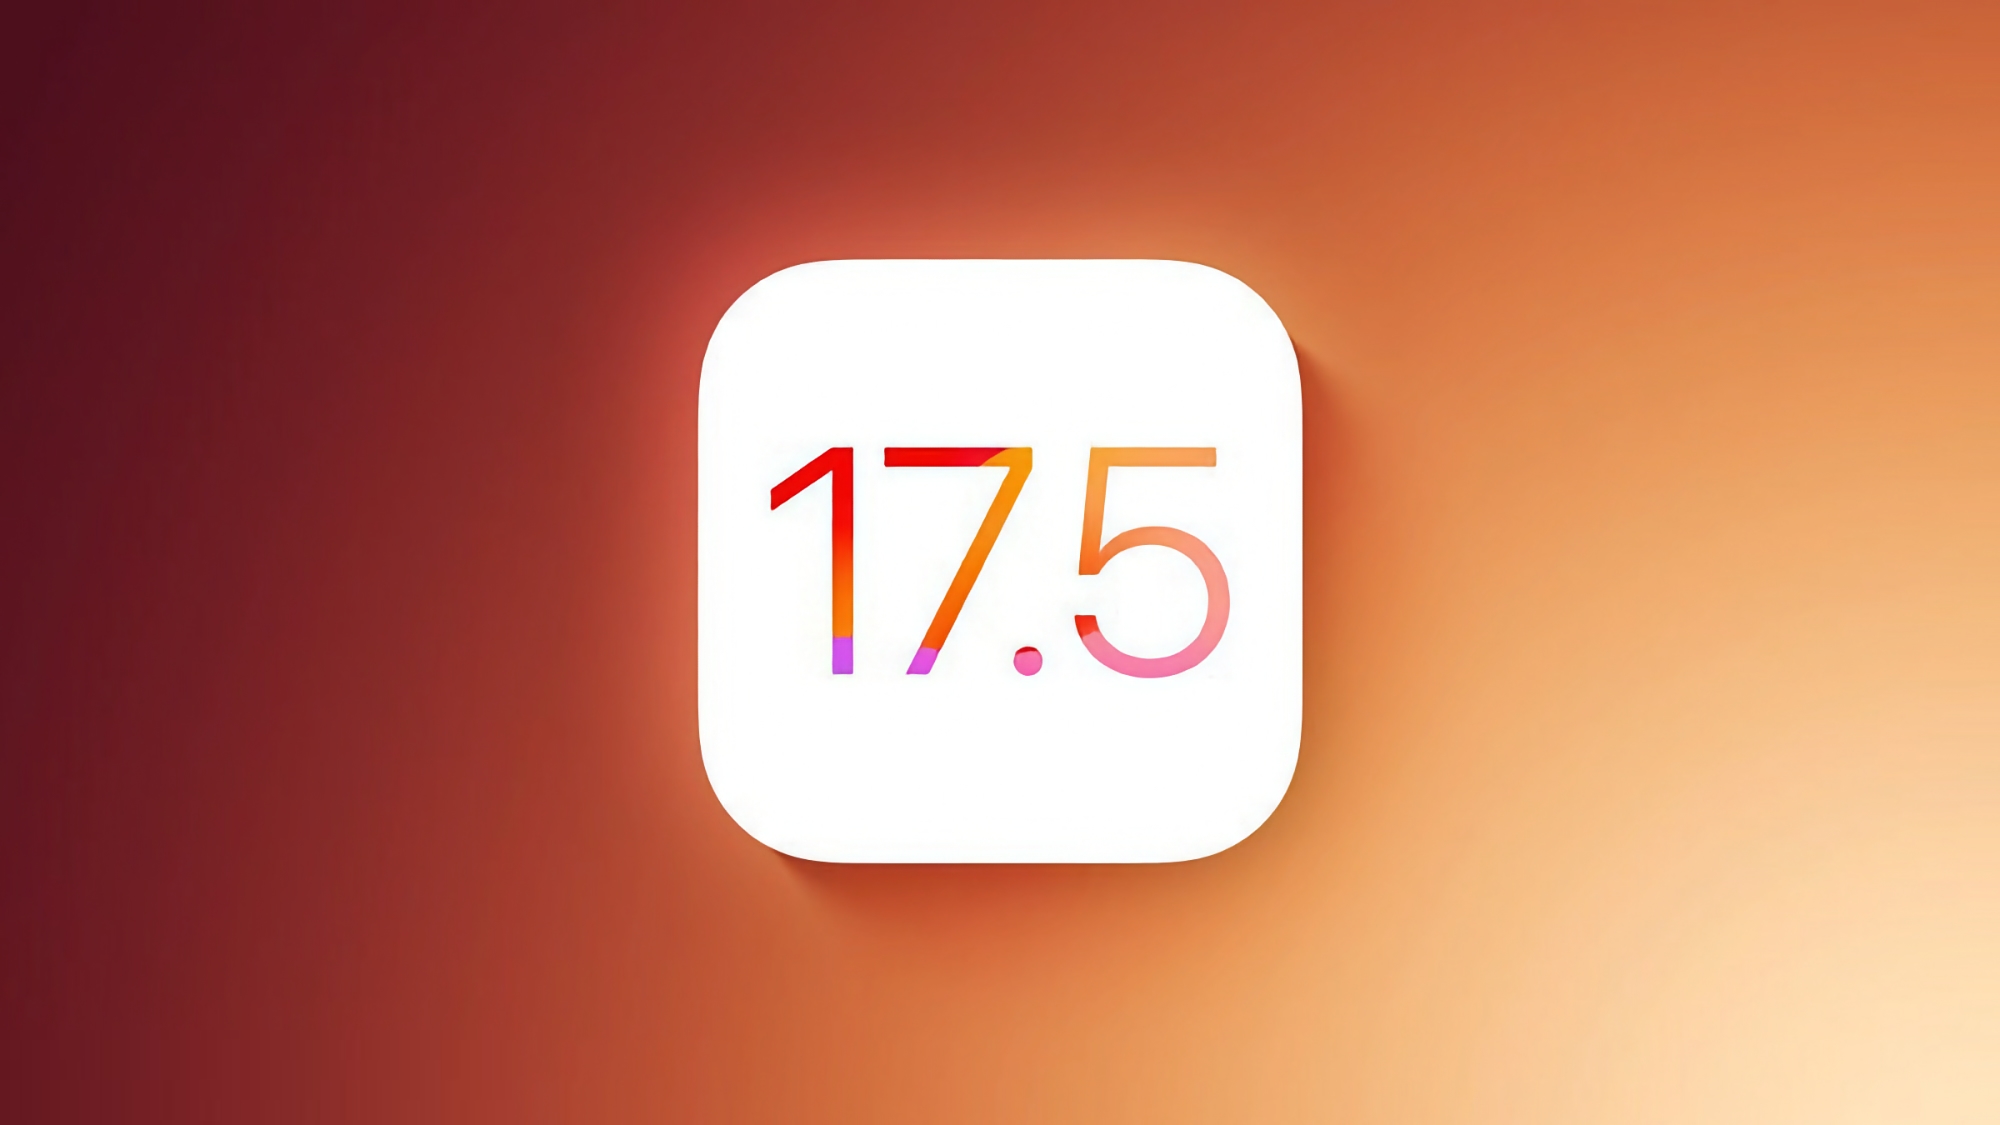 Apple has released a new beta version of iOS 17.5 and iPadOS 17.5 to developers